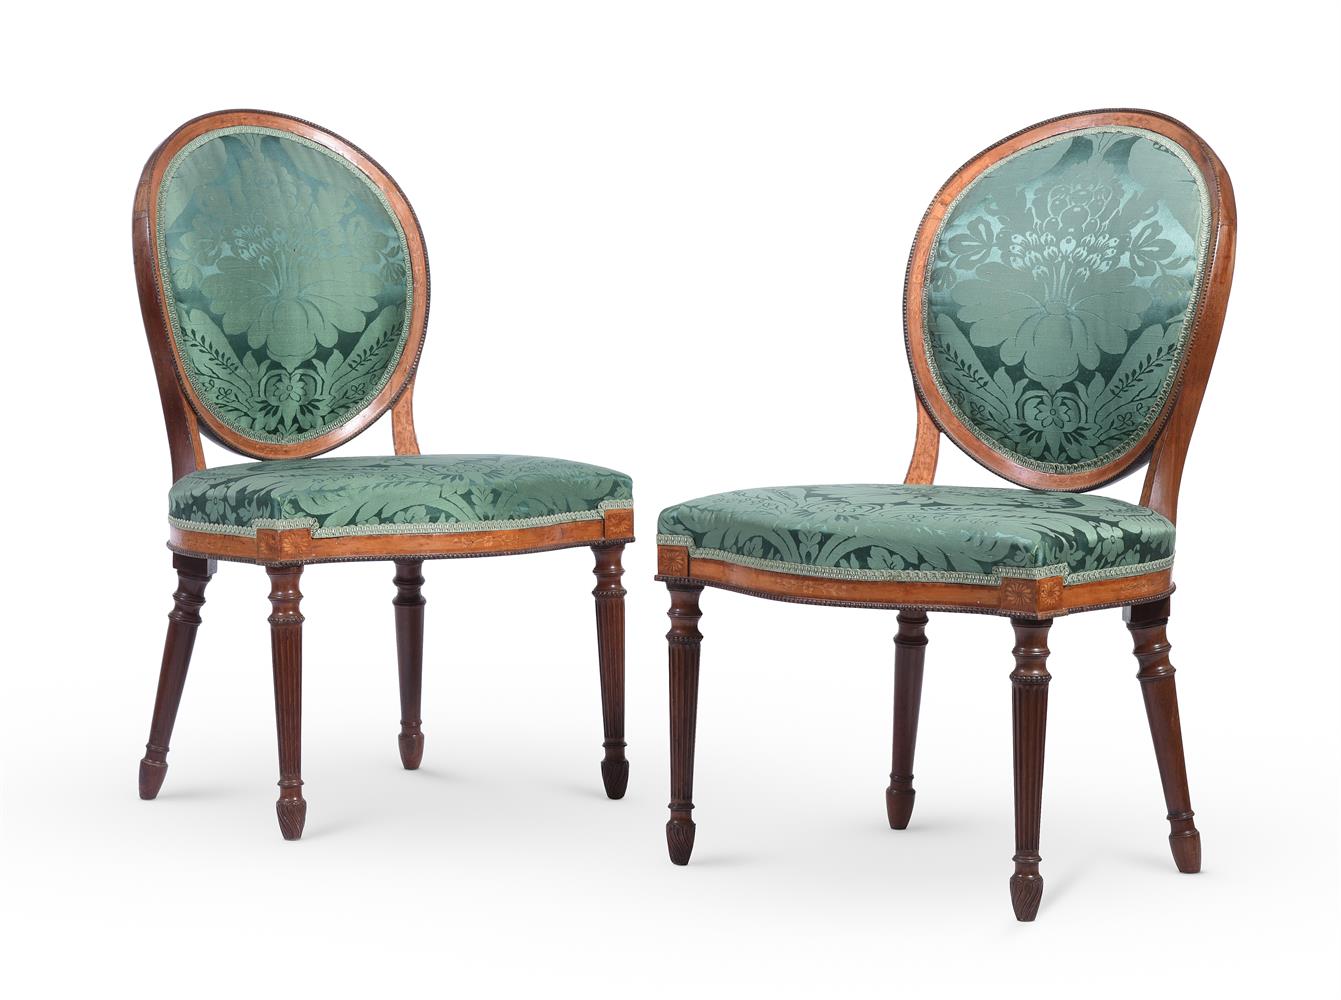 A SET OF EIGHT GEORGE III CHAIRS IN THE MANNER OF JOHN LINNELL, CIRCA 1780 - Image 2 of 6